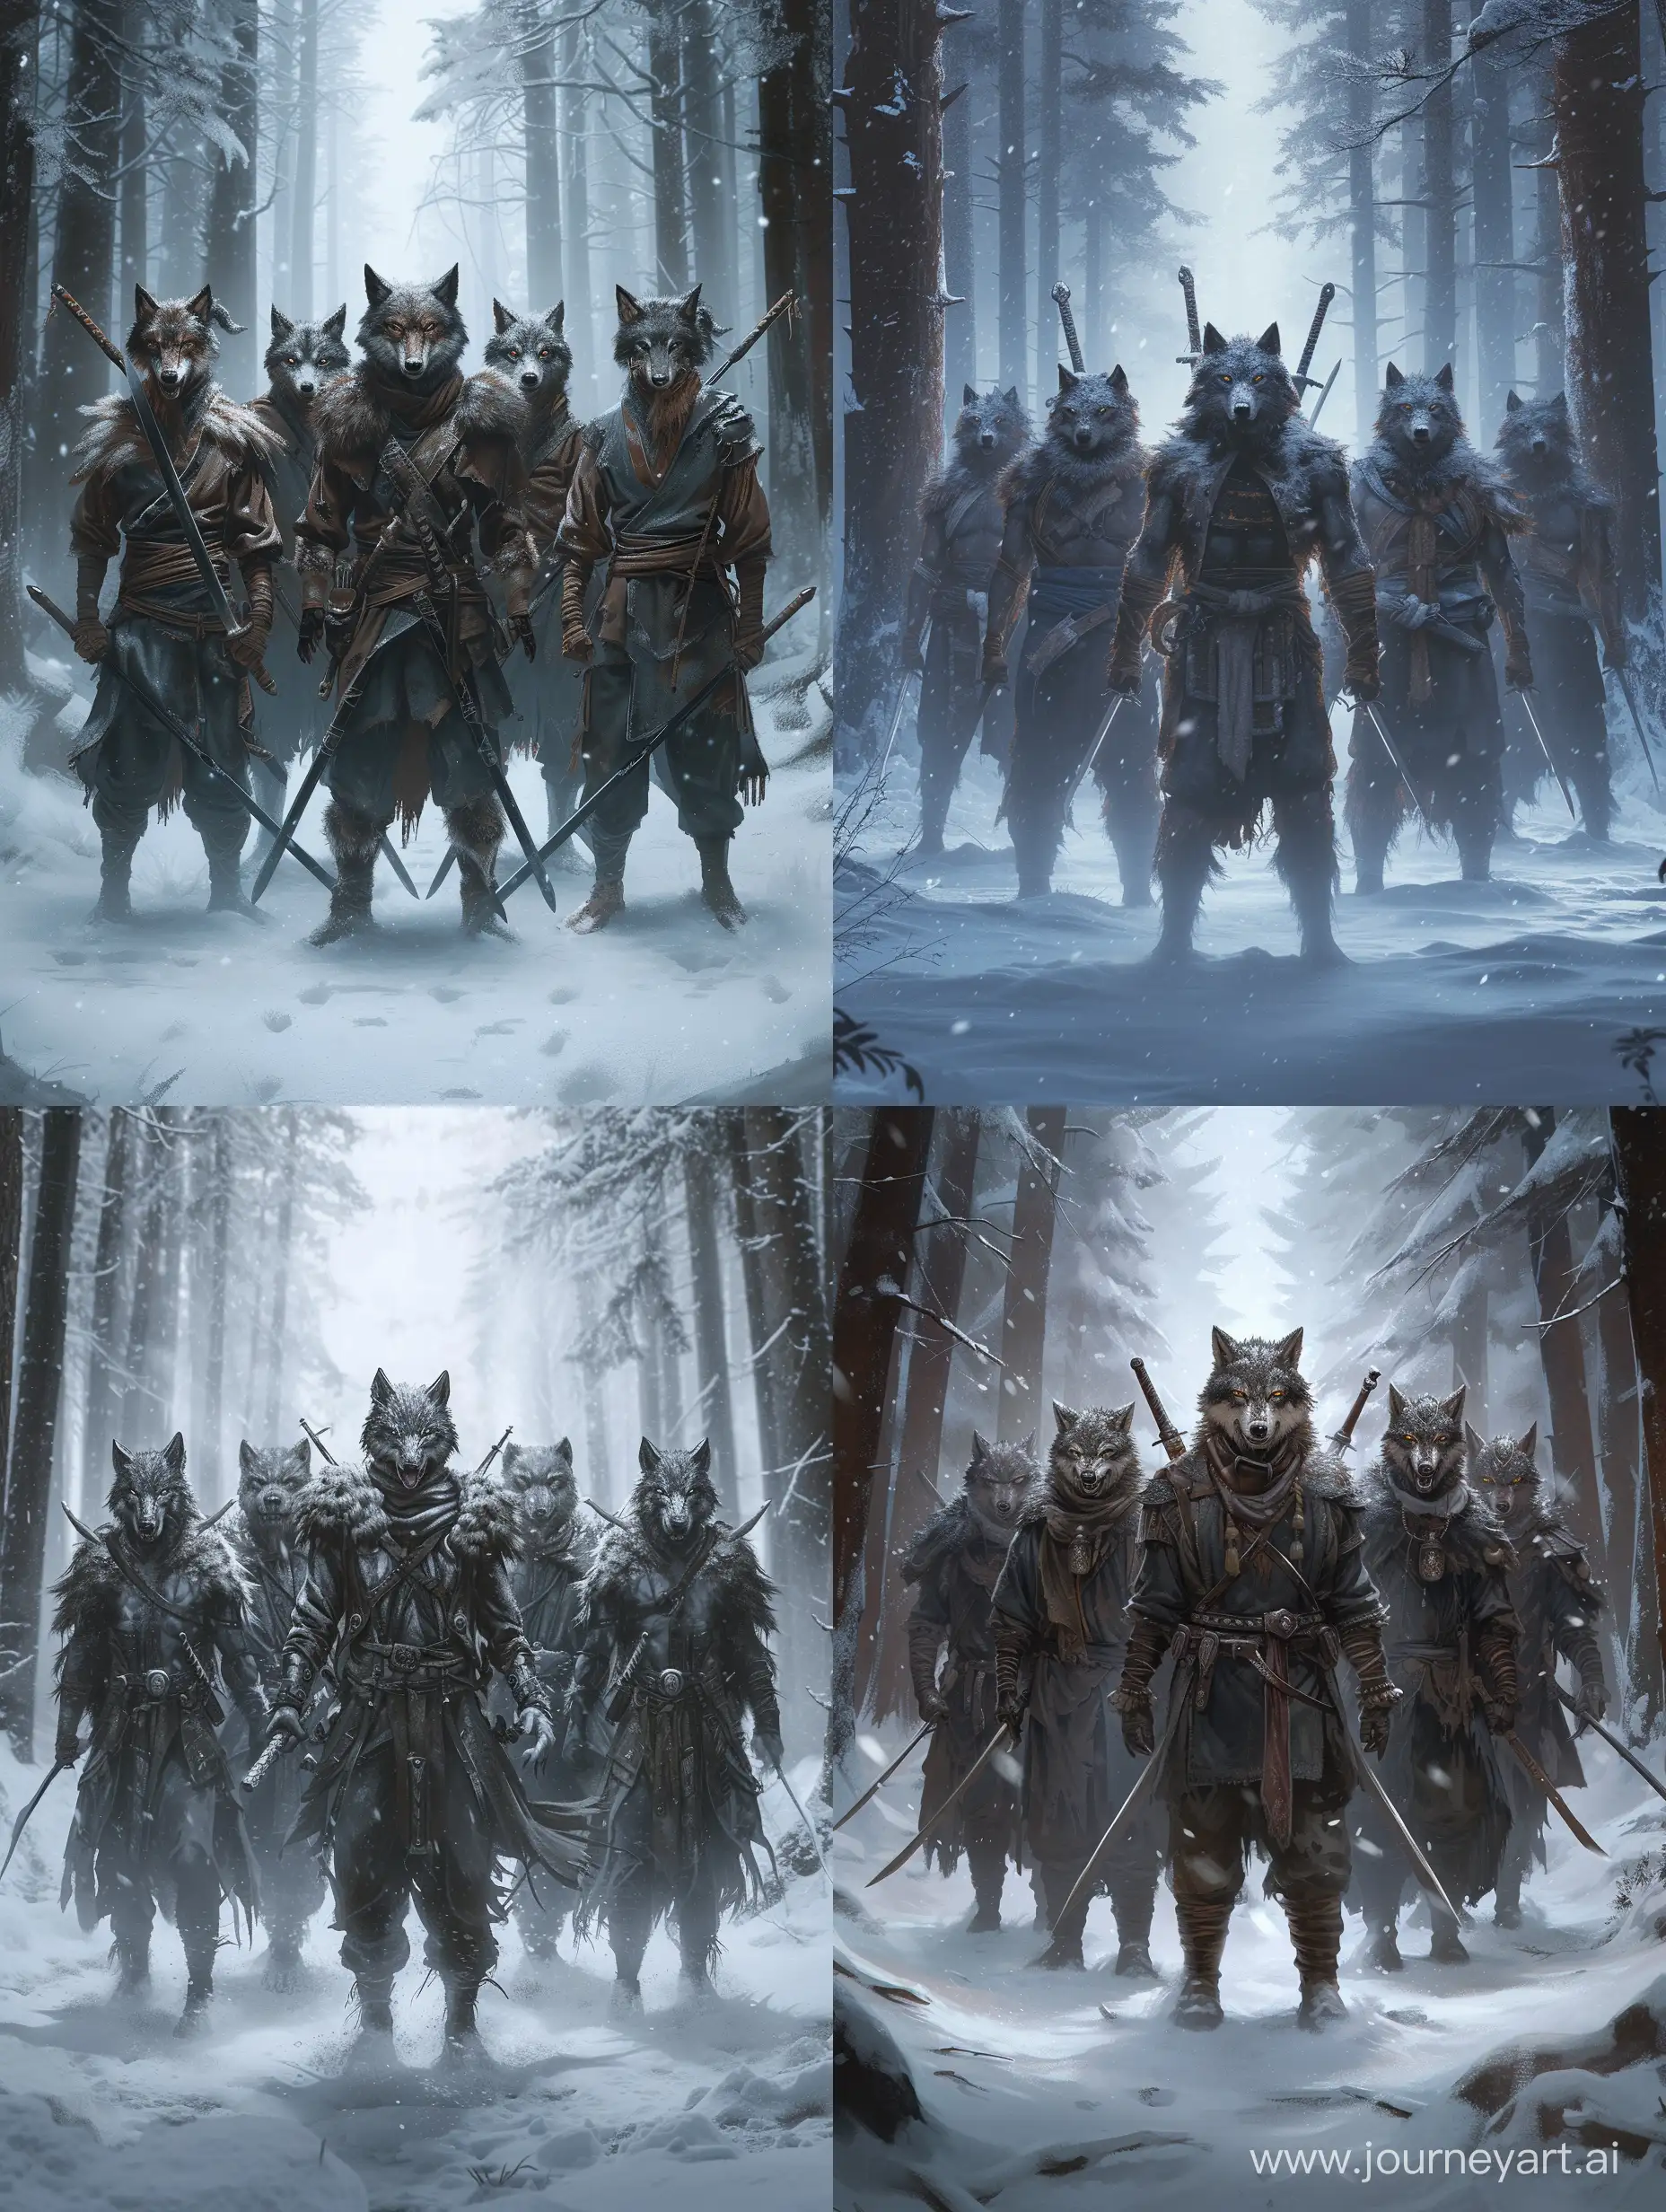 six warriors with a wolf's head and a human body,The leader of the wolves in the middle,two swords on his back,empty hands,in snowy forest,fierce,Detailed clothing.incredible detail,dark light,terrifying.